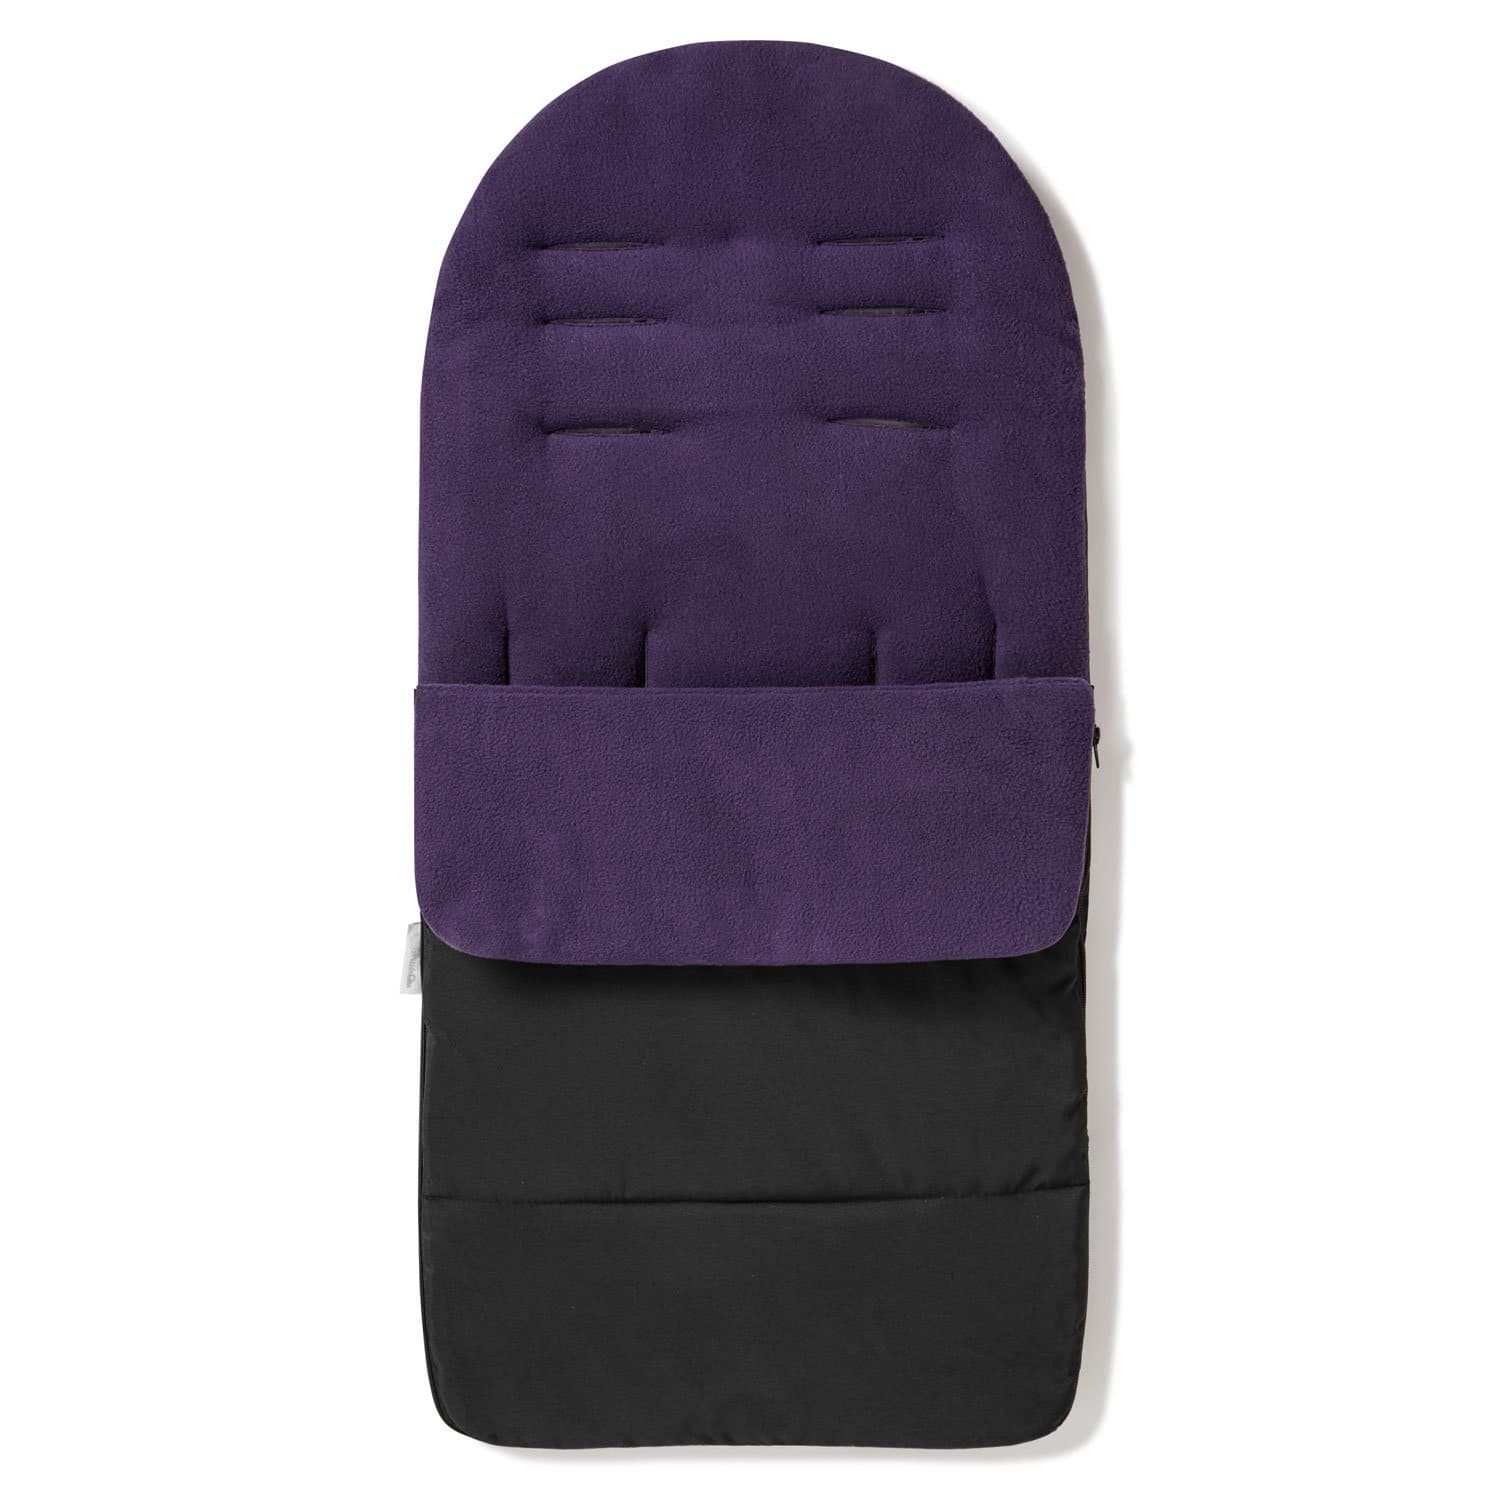 Premium Footmuff / Cosy Toes Compatible with Seed - Plum Purple / Fits All Models | For Your Little One